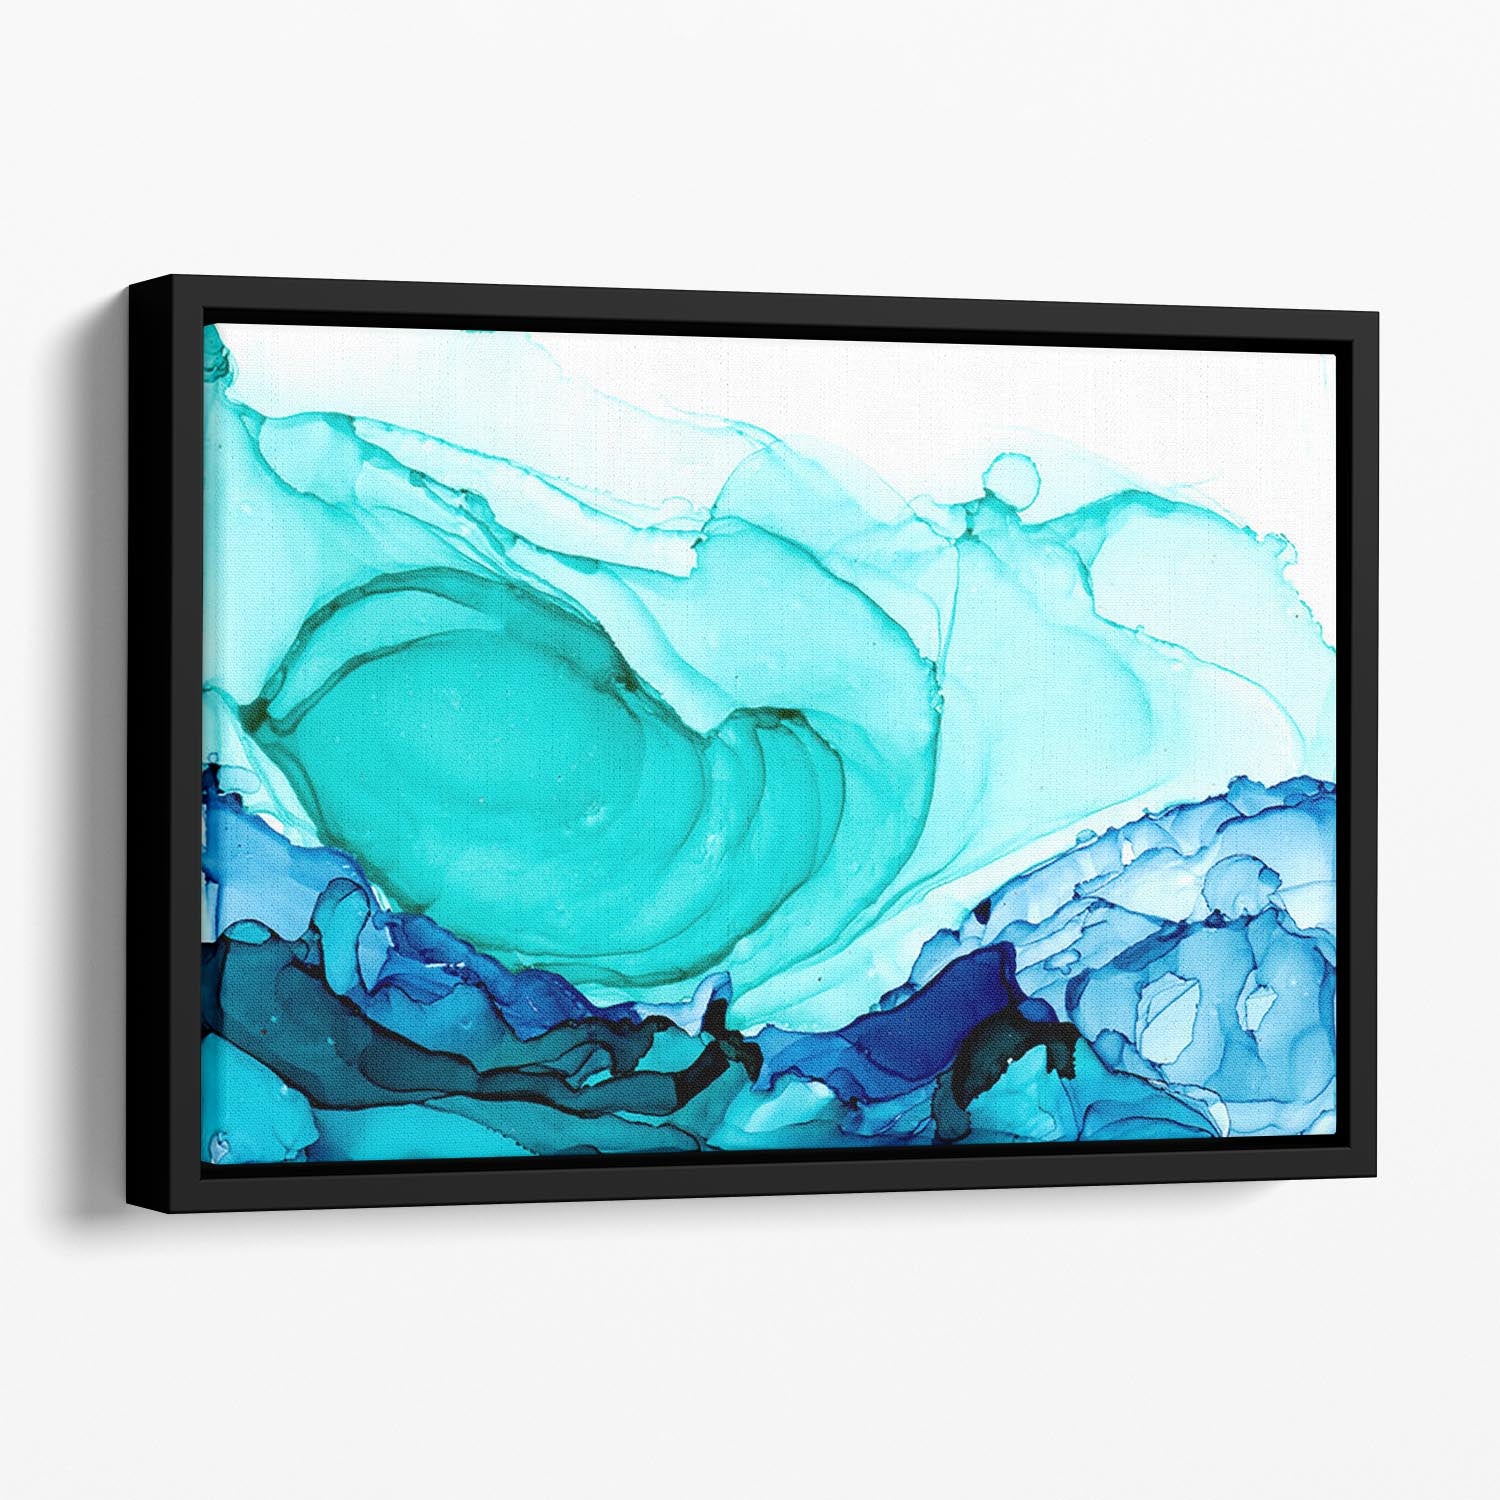 Cracked Blue and Teal Marble Floating Framed Canvas - Canvas Art Rocks - 1